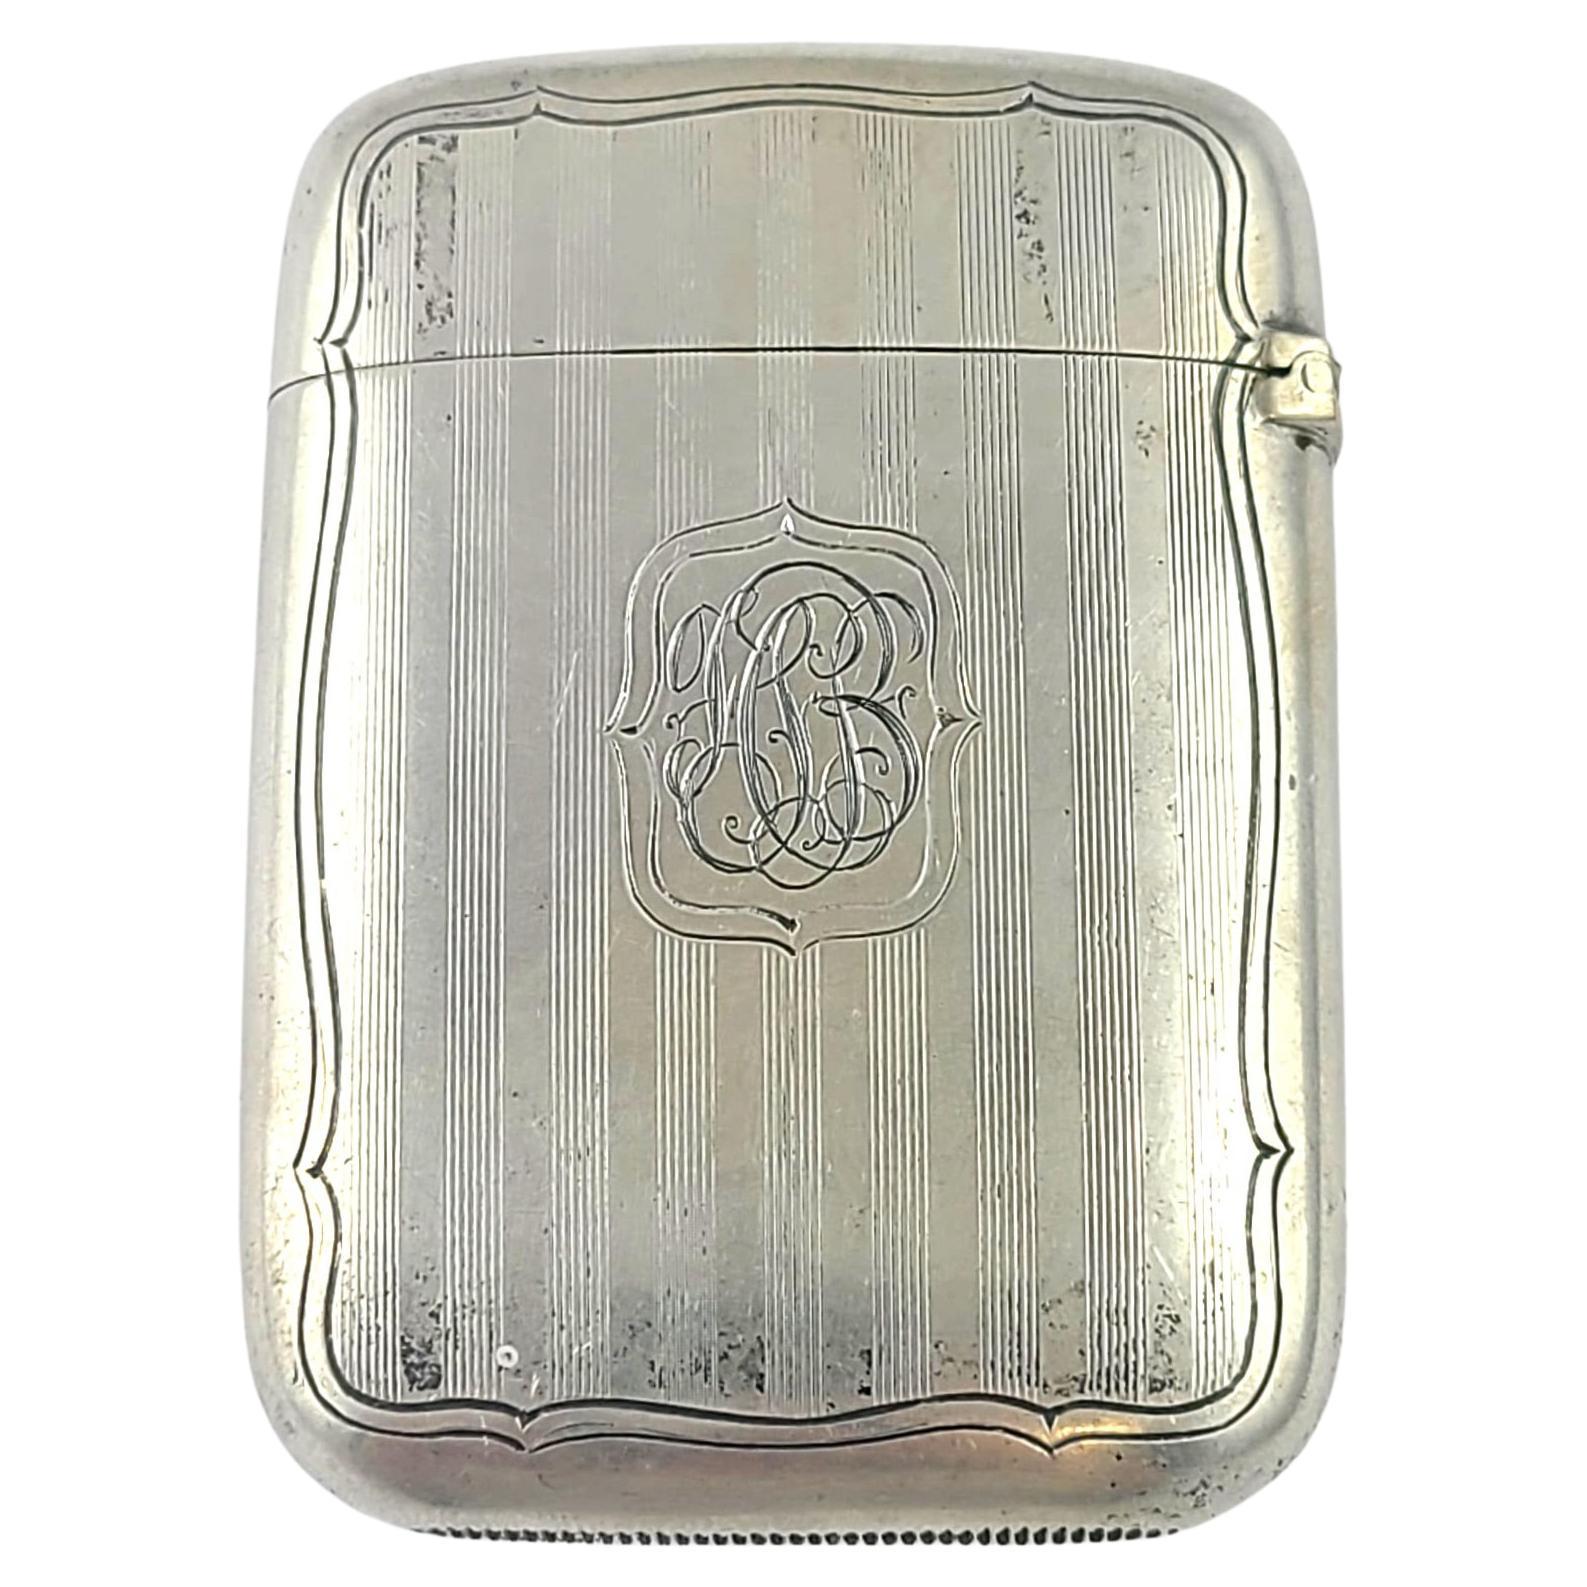 R Wallace & Sons Mfg Co Sterling Silver Match Safe/Vesta Case with Monogram